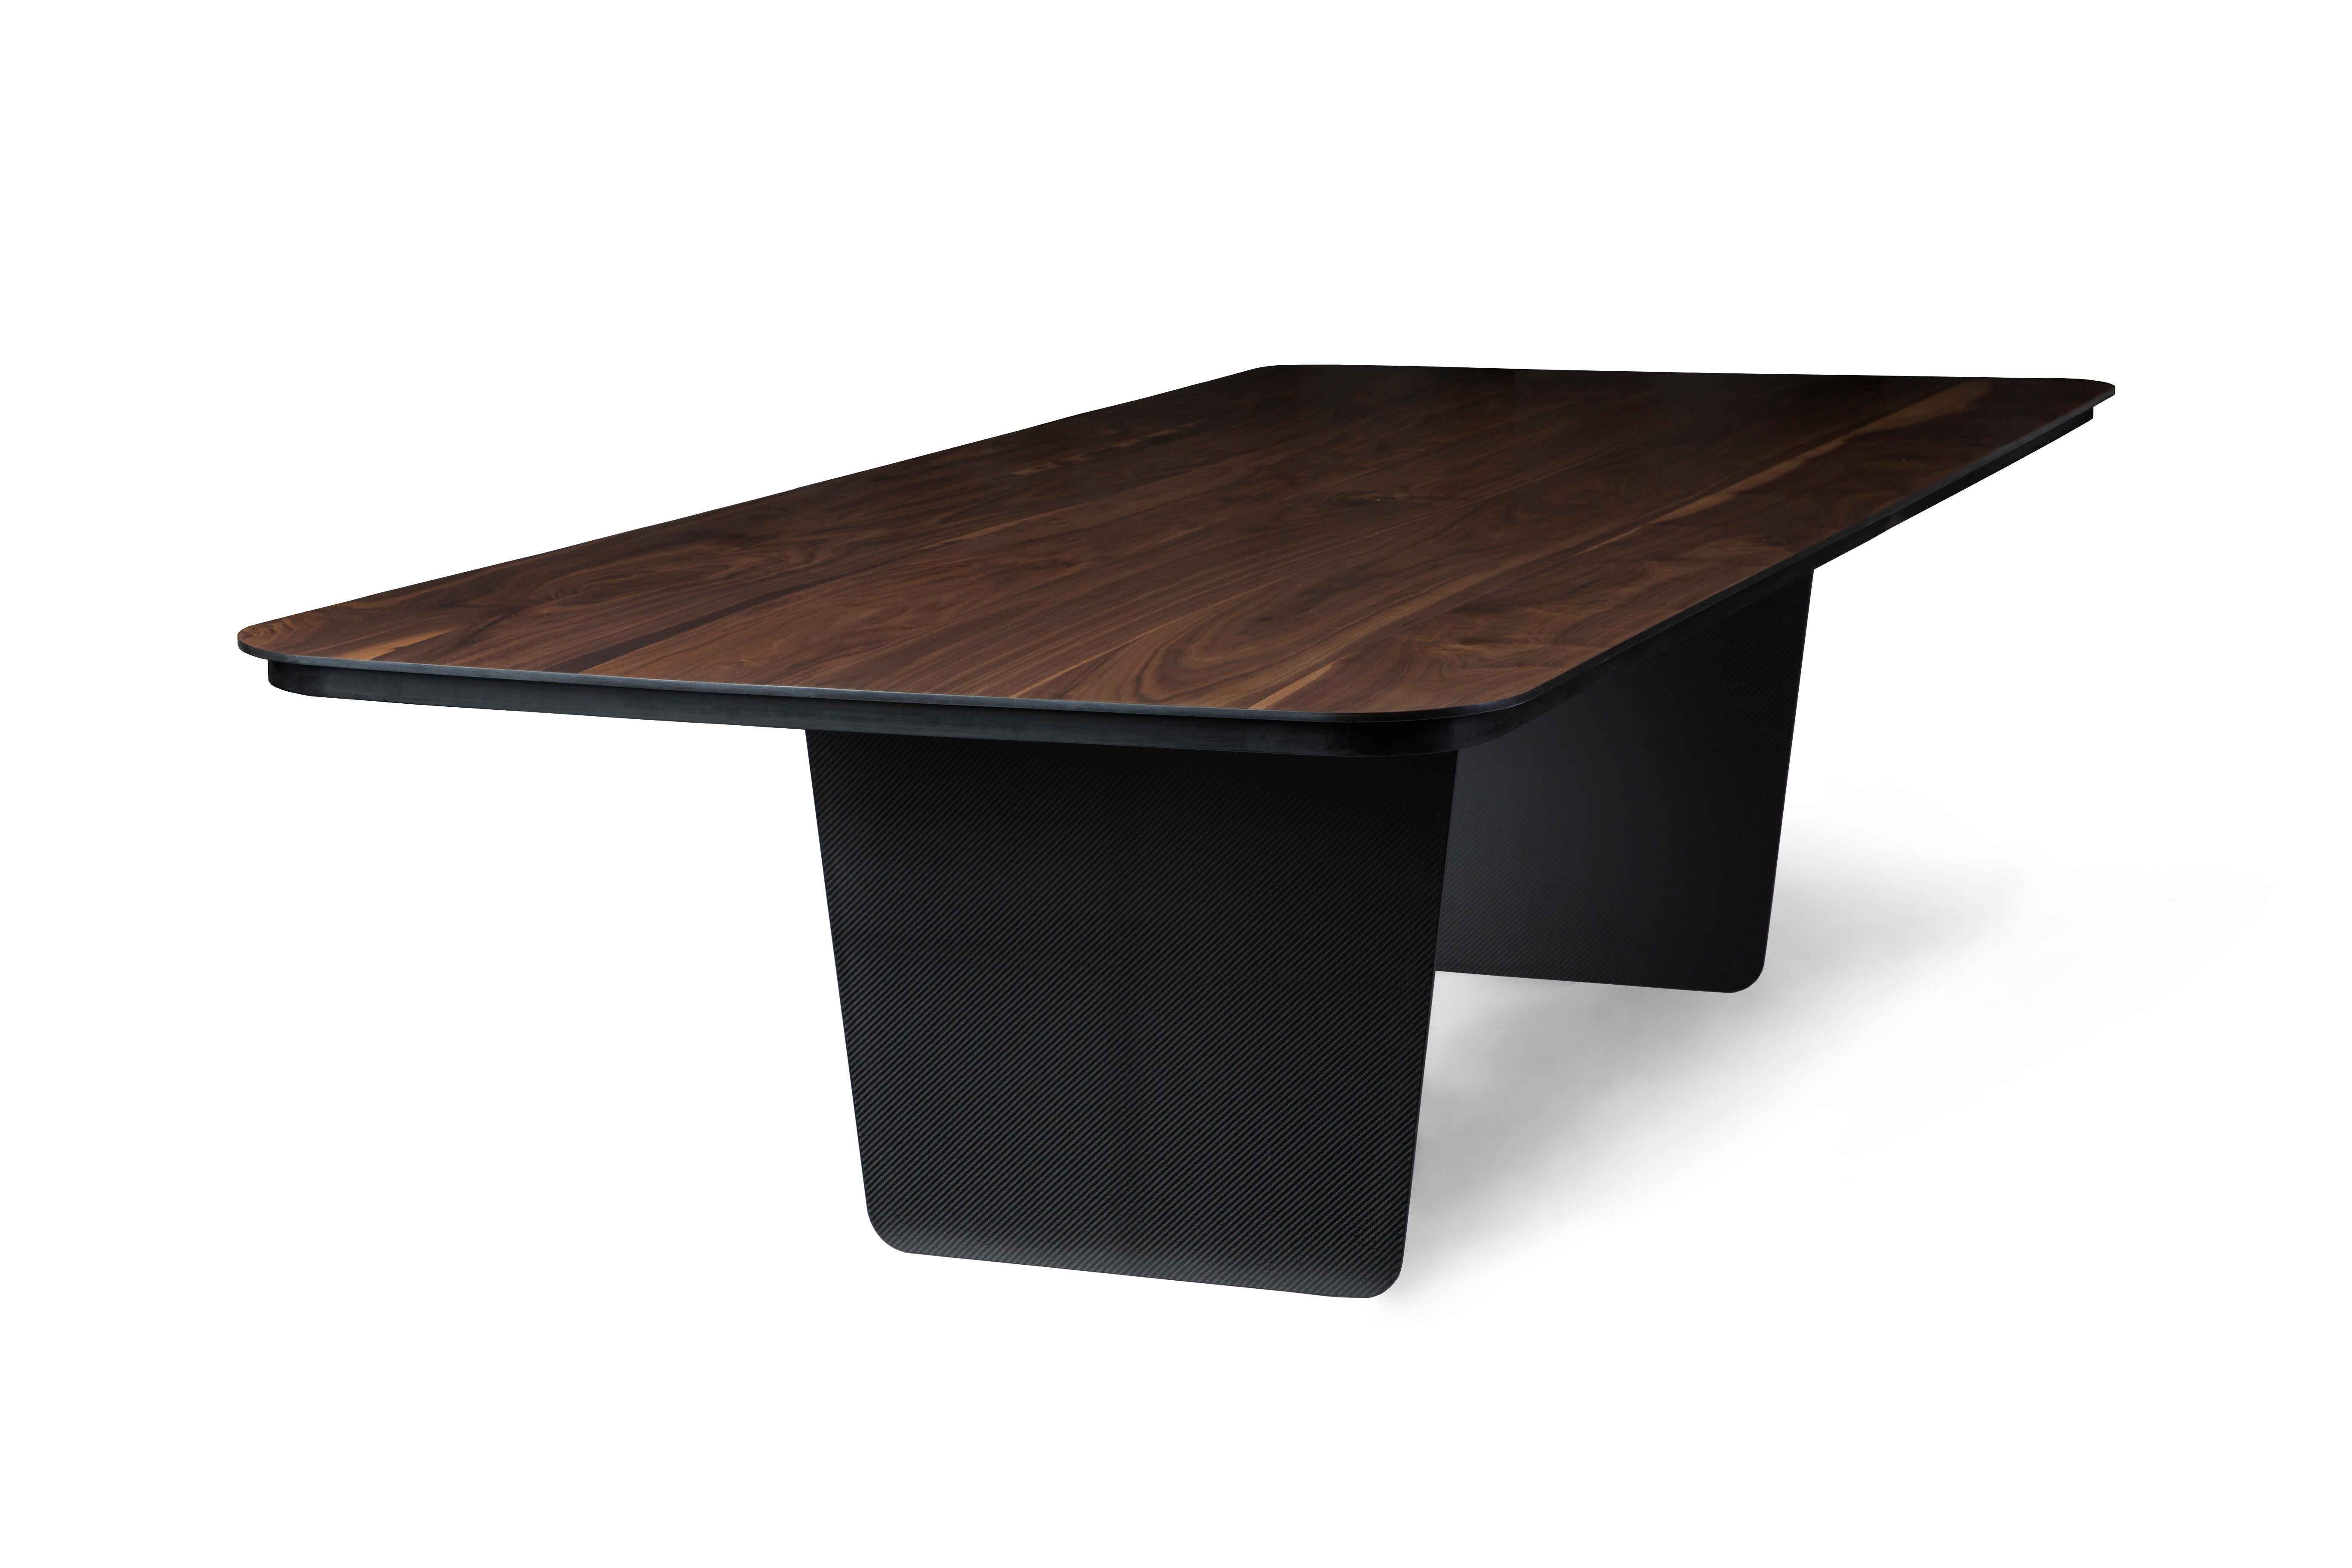 Carbon Claro table by Tokio
Dimensions: D 130 x W 300 x H 75 cm.
Materials: walnut, carbon fiber.

Asobi is a creative consultancy specializing in product design and brand development. The company made its acclaimed debut in 2005 at the London